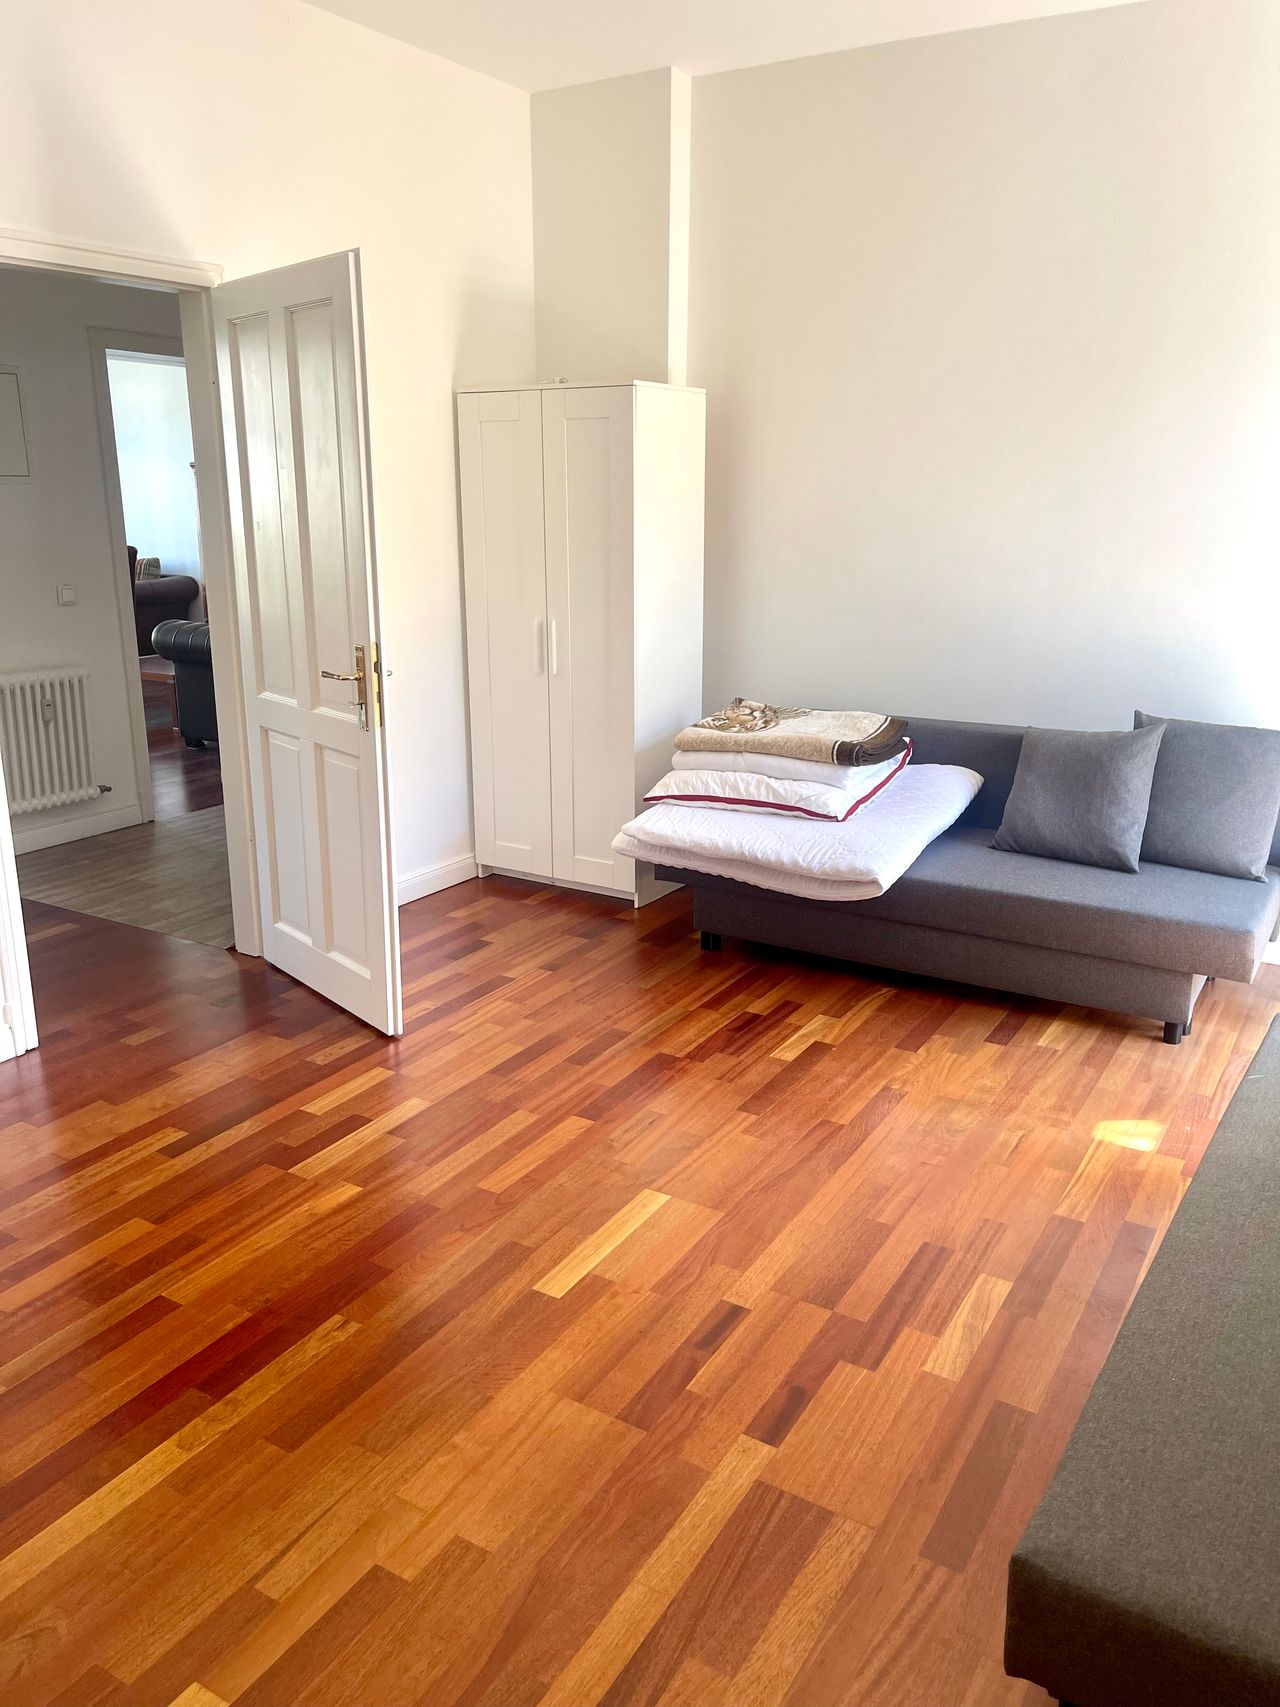 Lovely apartment in the most requested area of Berlin!